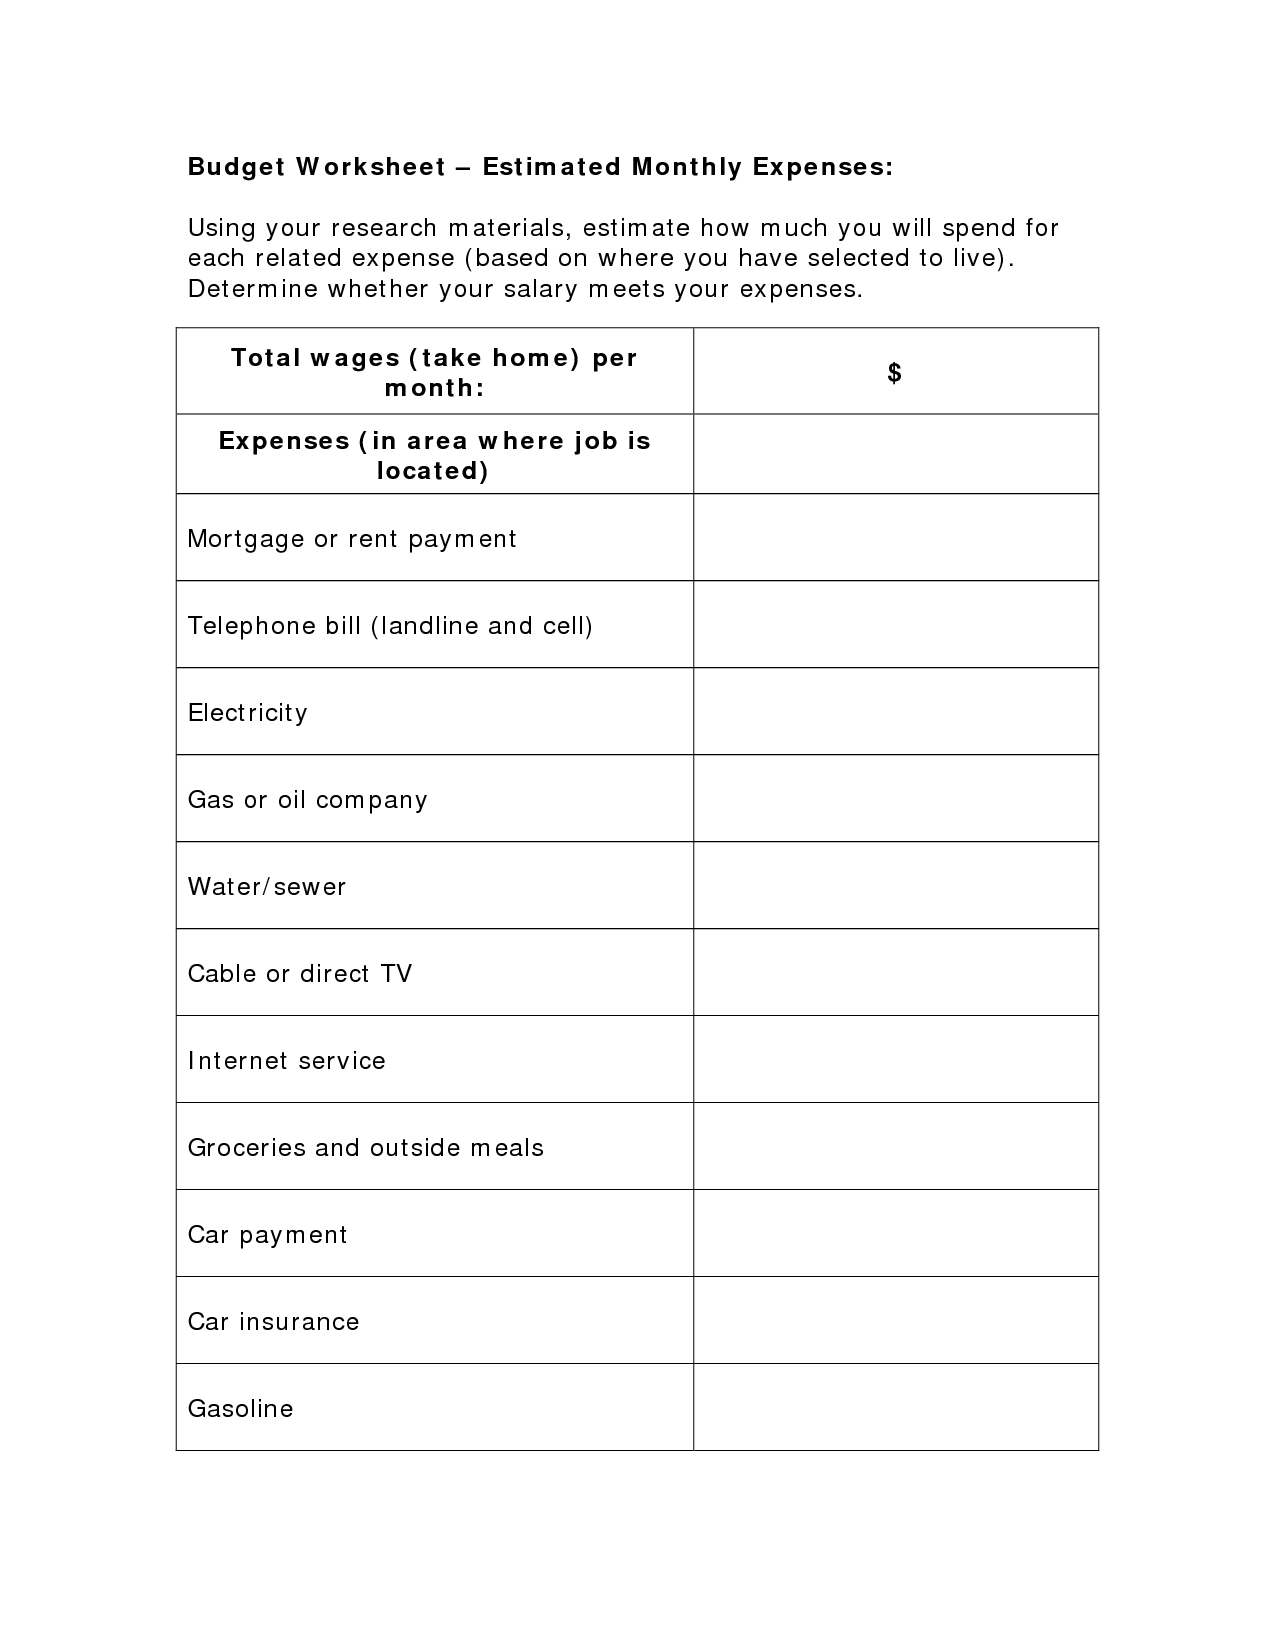 16 Best Images of Budget Worksheet Monthly Bill - Blank ...